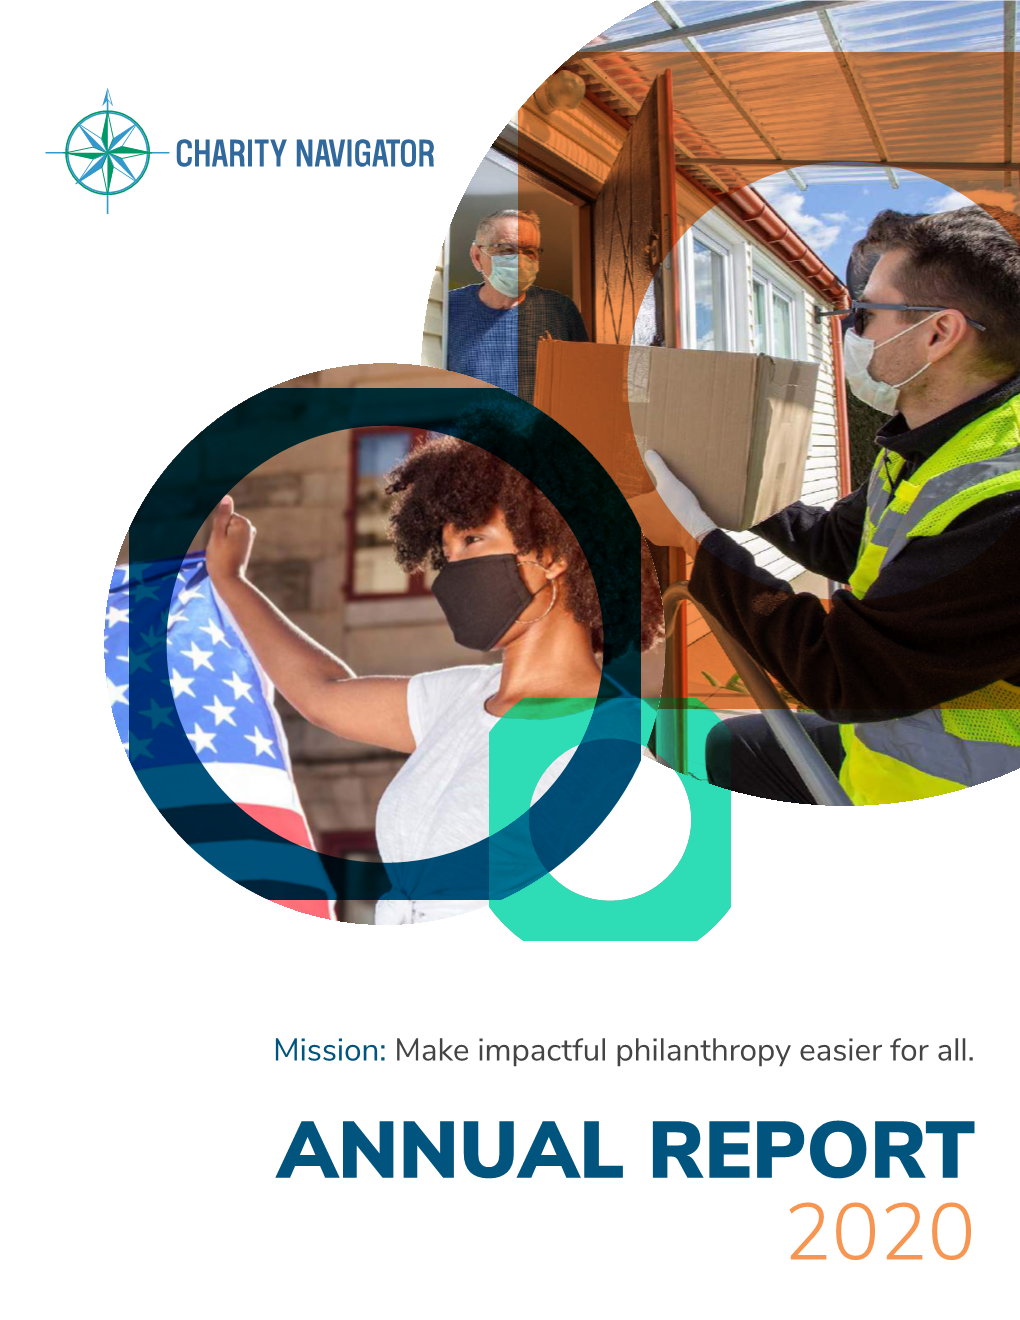 2020 Annual Report Charity Navigator 2020 Annual Report | 3 Our Path to Increased Scale What Your Support and Depth Made Possible This Year